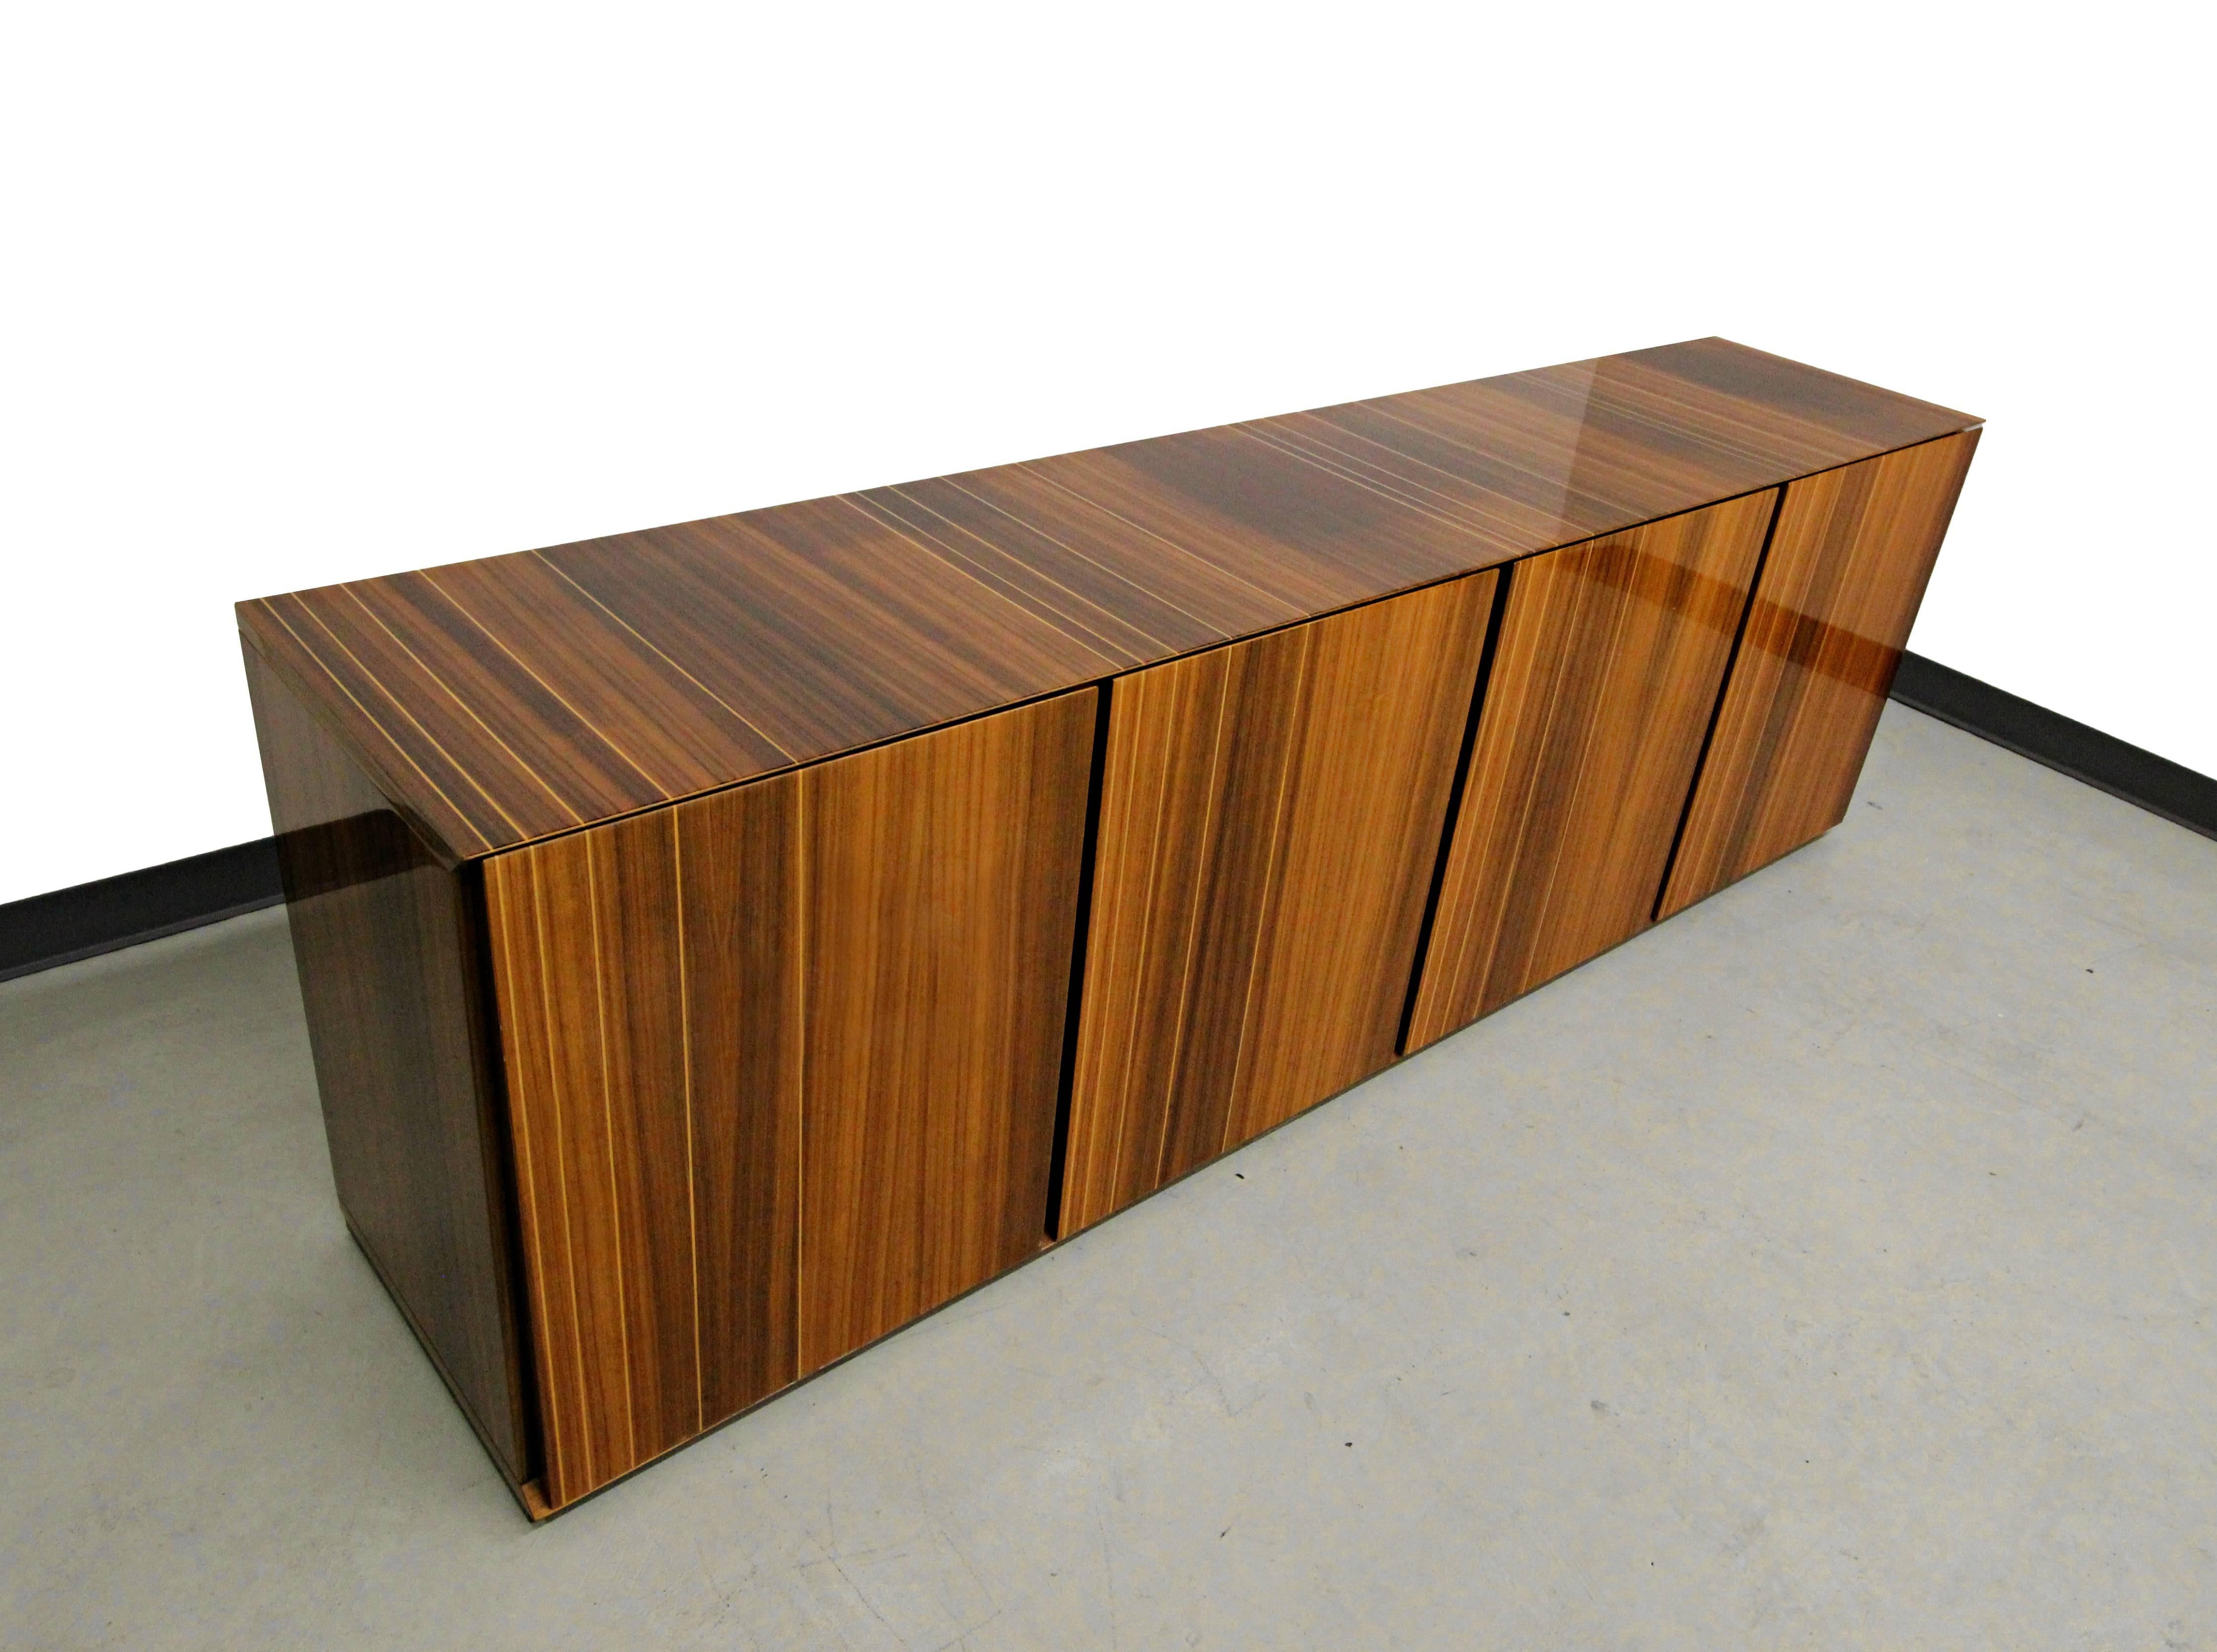 This gorgeous Italian lacquered zebrawood credenza is a monumental beauty measuring in at 7.5ft.  It is a true work of art.  With show stopping grain, gorgeous lacquer sheen and sleek modern lines it's a real statement piece of furniture.